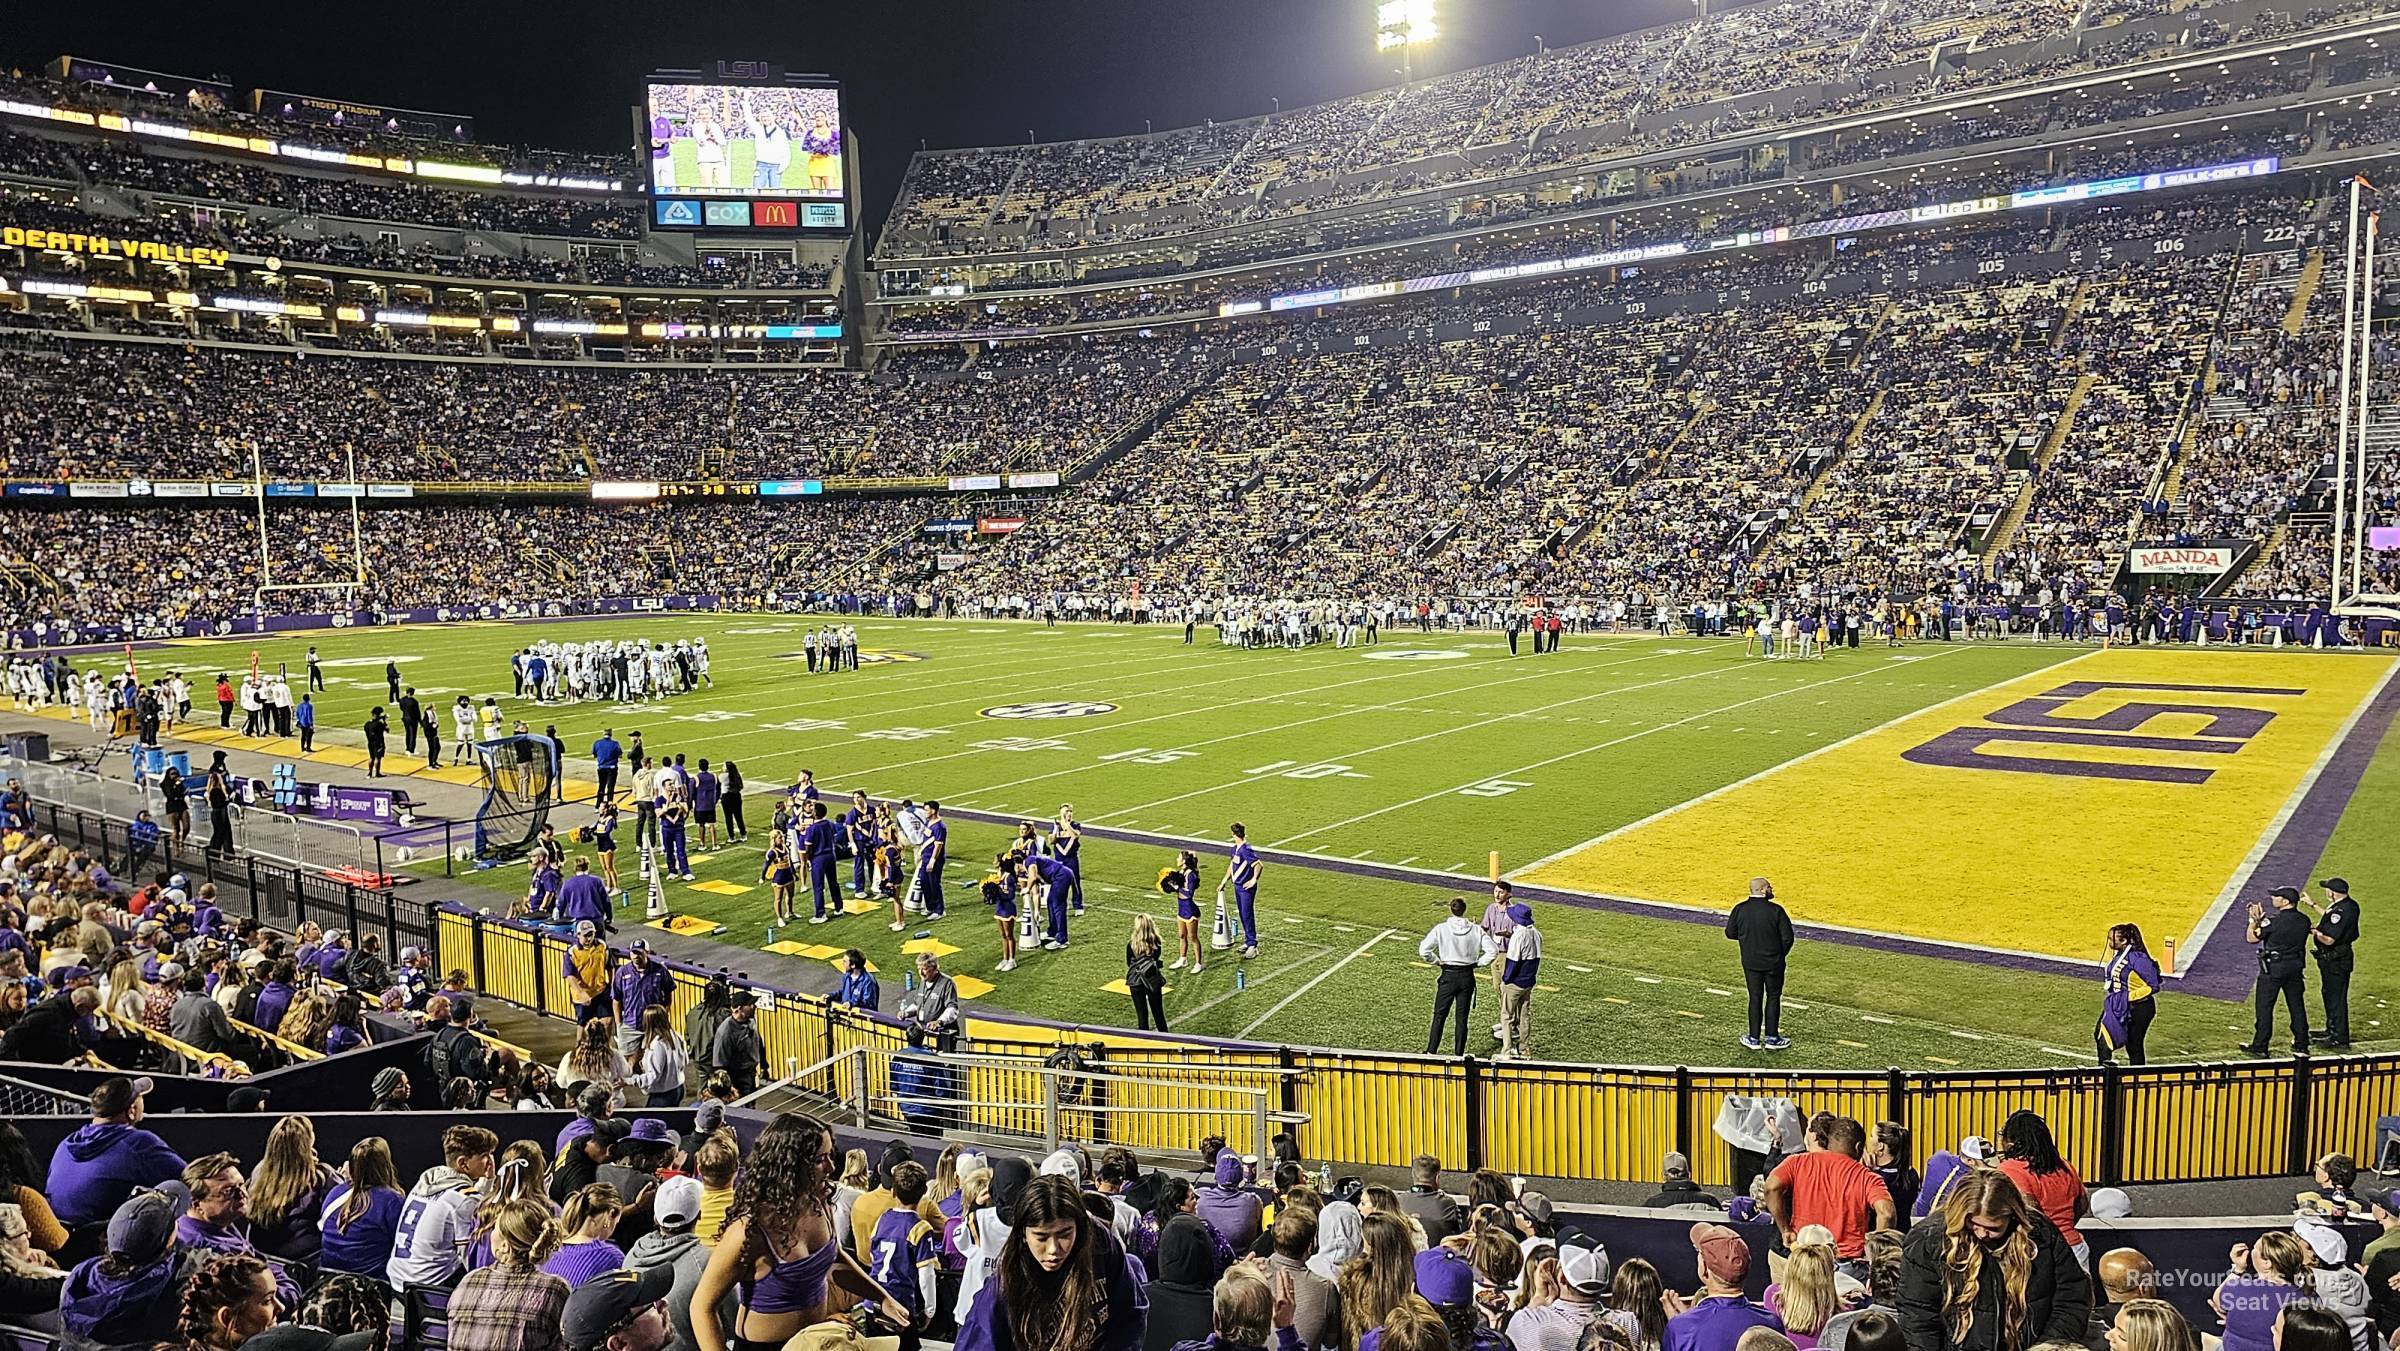 section 212, row 1 seat view  - tiger stadium